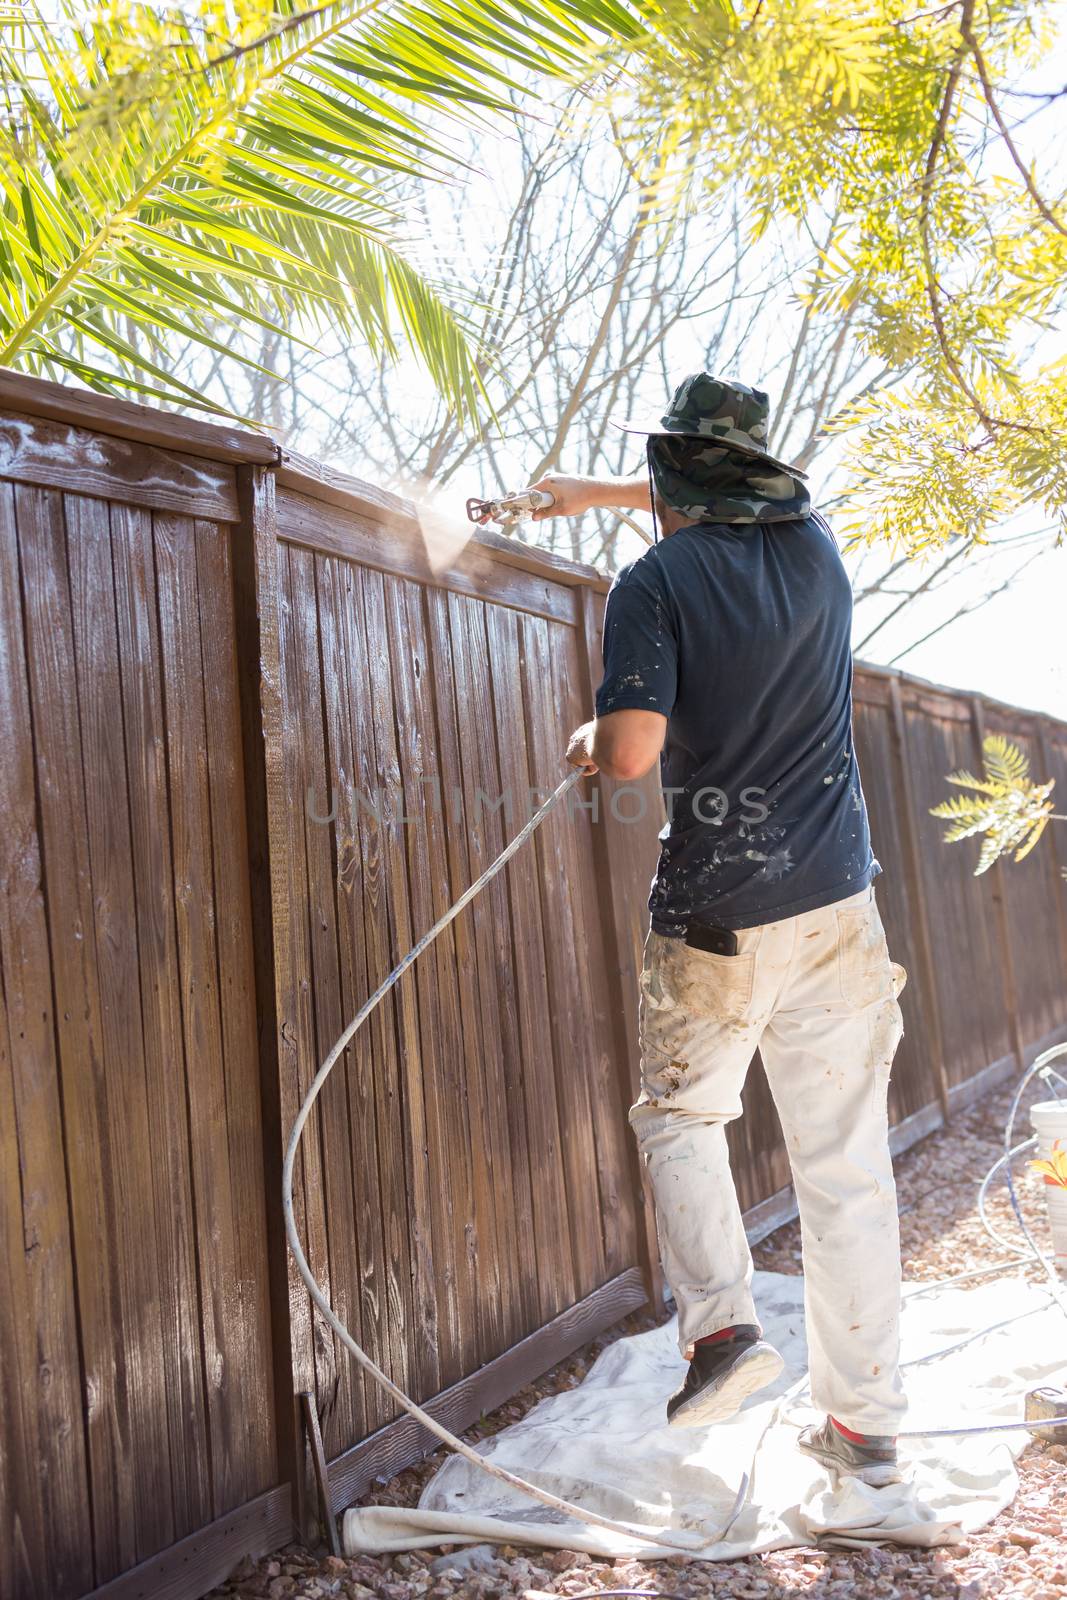 Professional Painter Spraying House Yard Fence with Wood Stain.